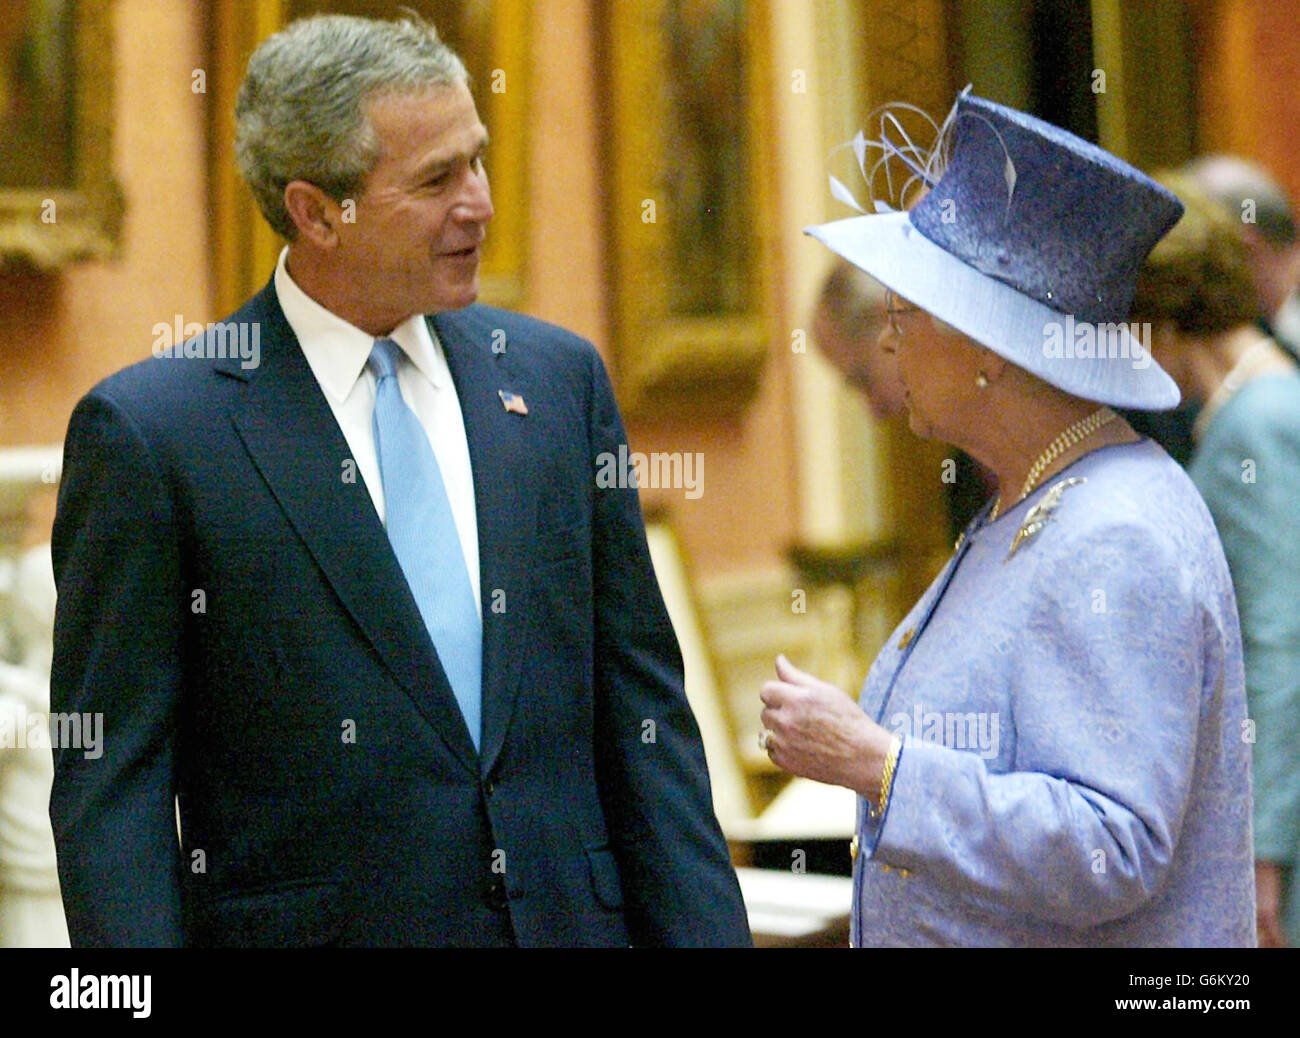 Queen Elizabeth II accompanies America's President George Bush as they enter the Queen's Gallery at Buckingham Palace, at the start of the President's state visit to Britain. Later, Mr Bush was going on to make a speech at the Banqueting Hall in Whitehall and visit the US Embassy. Stock Photo